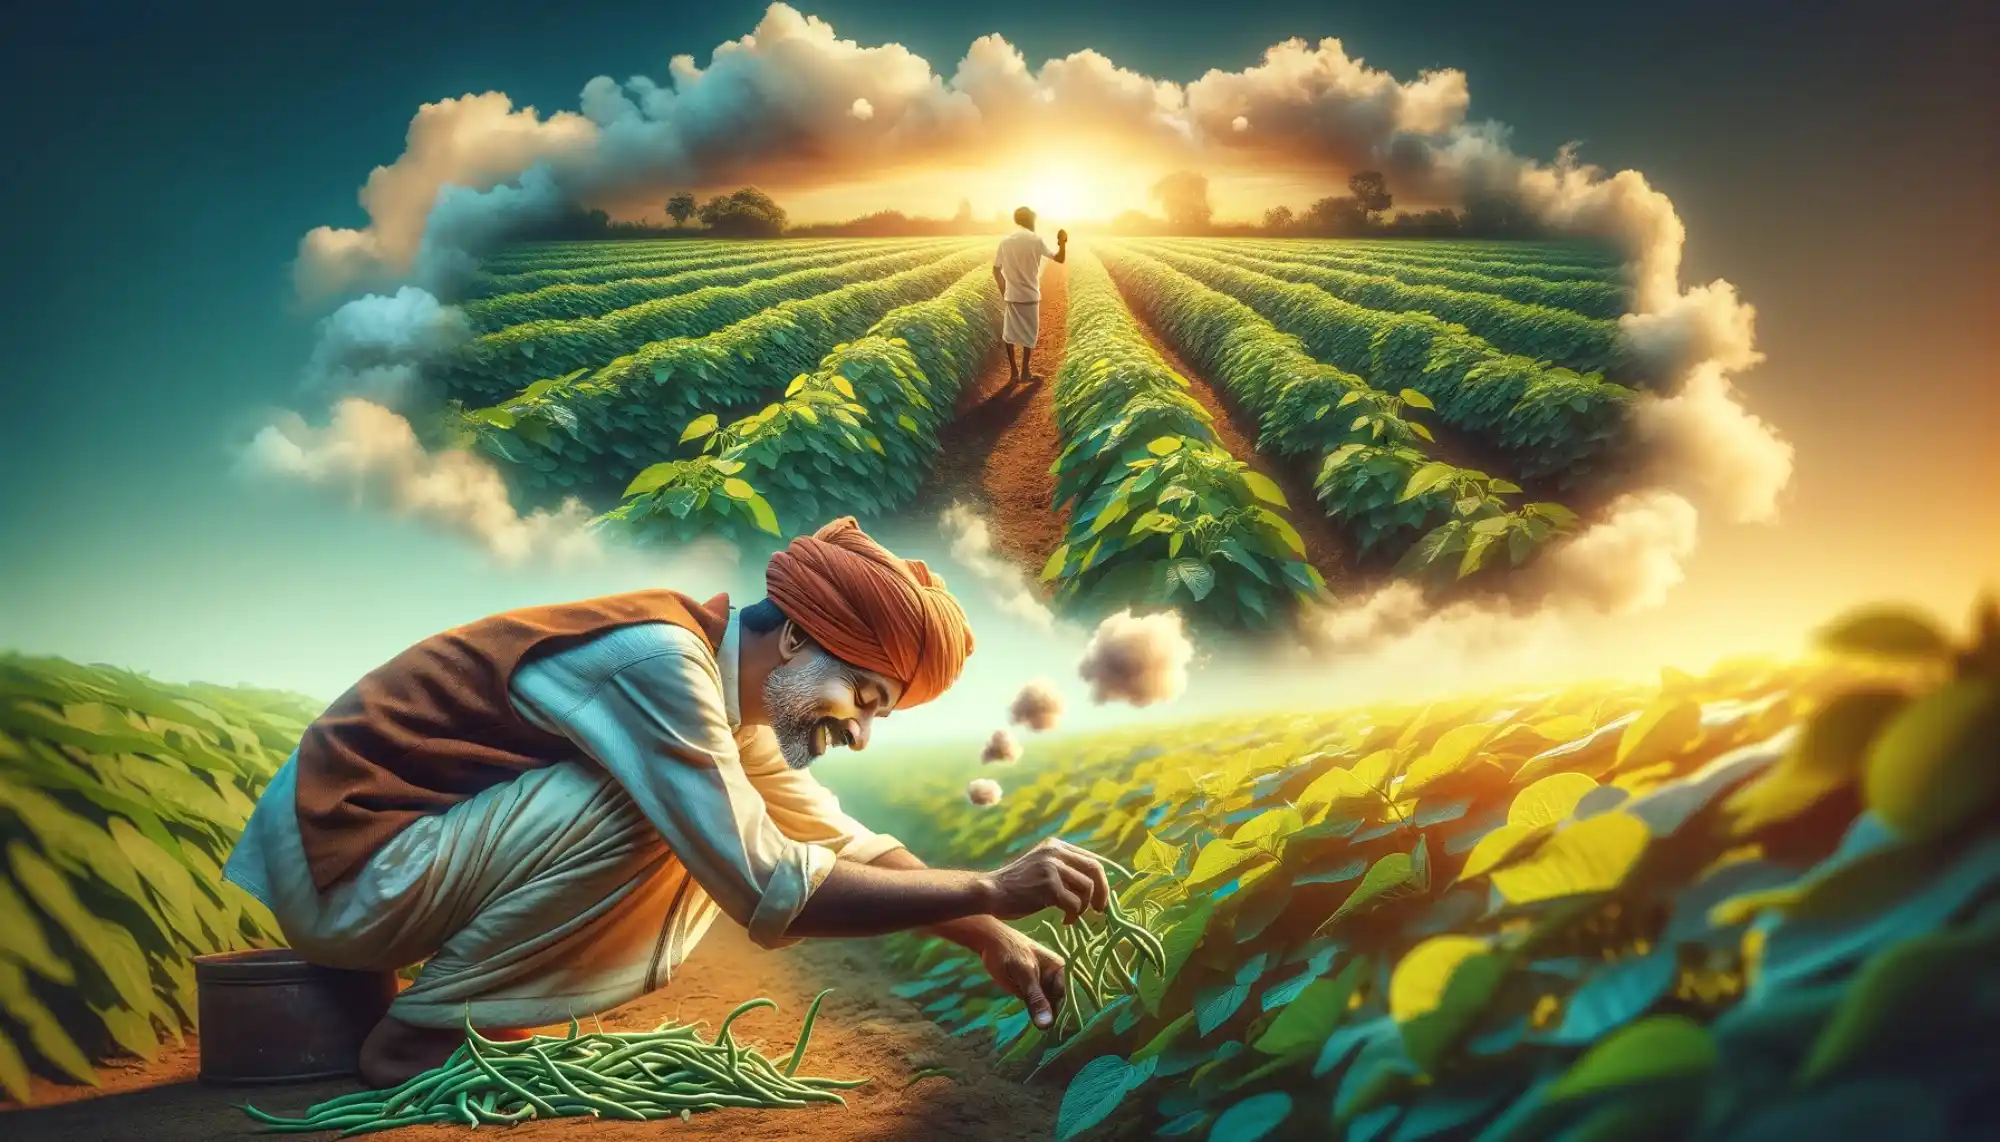 A farmer dreaming about harvesting beans in dream